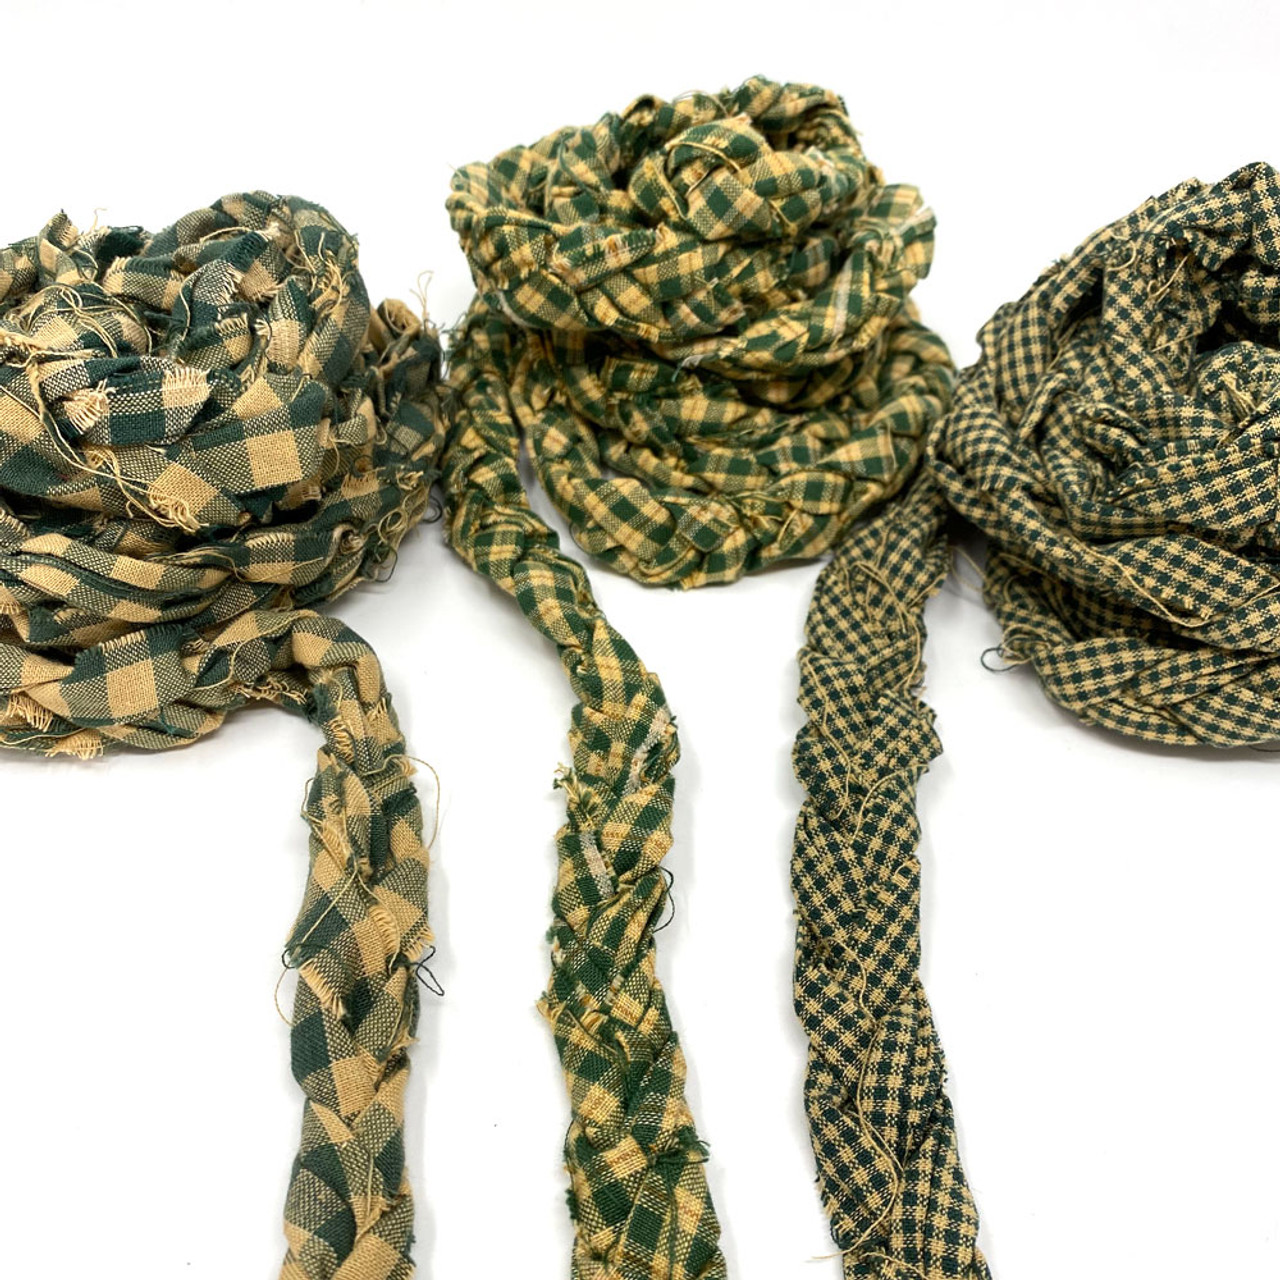 Set of 3 Assorted Green Multi Plaid Braided Garlands - 9 feet each - by Marilee Home